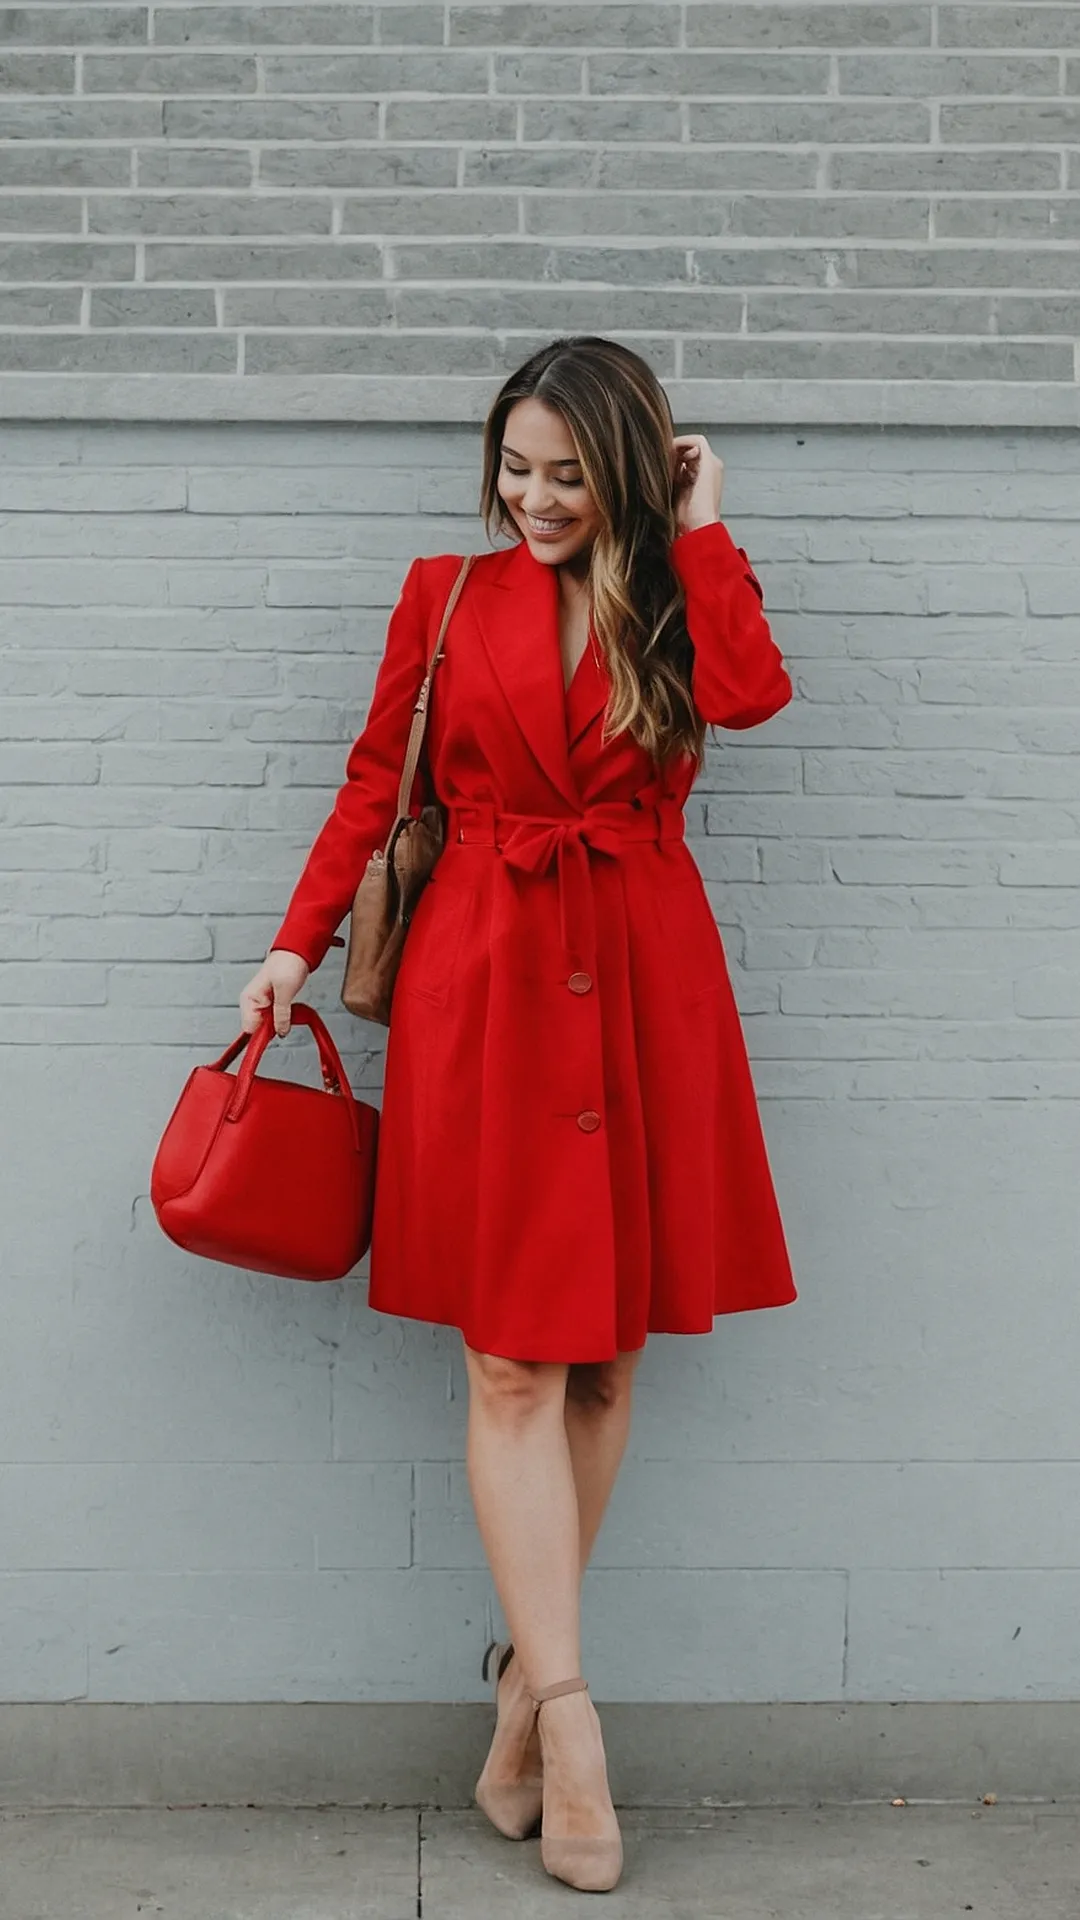 Scarlet Sensation: Red Women's Outfit Inspiration